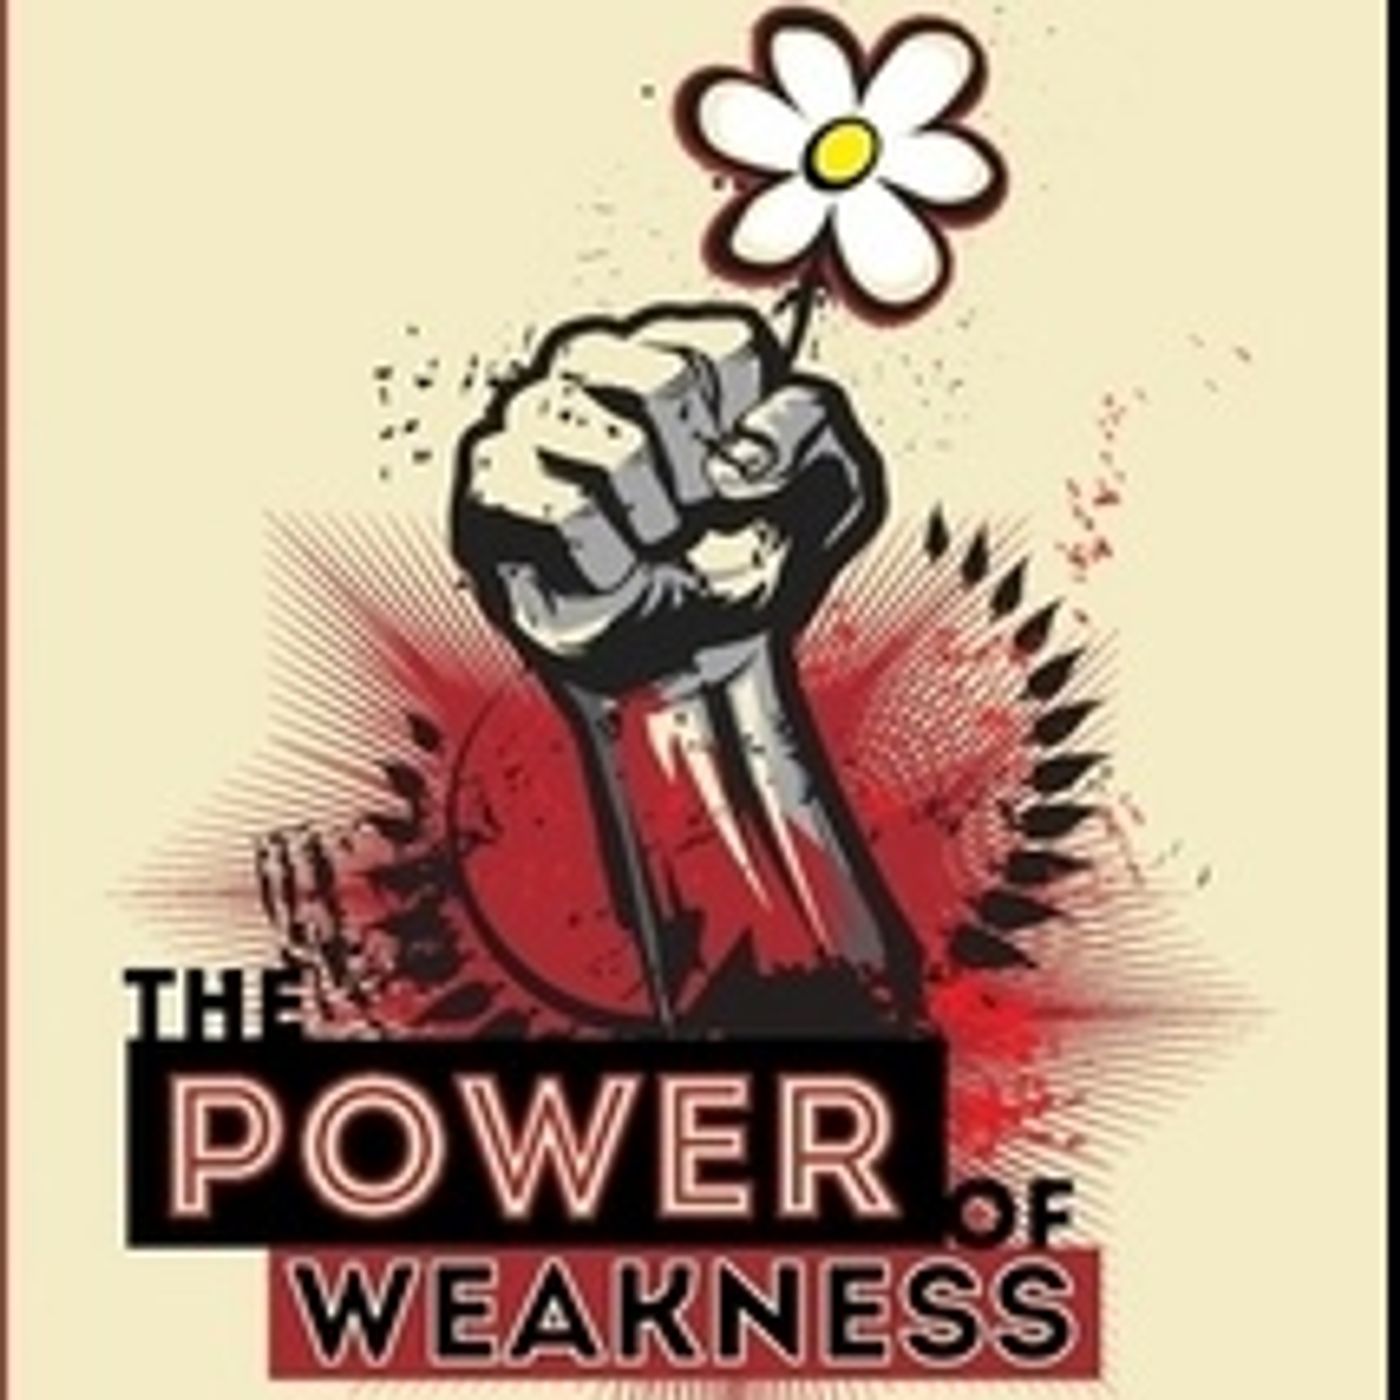 What is the Power of Weakness?